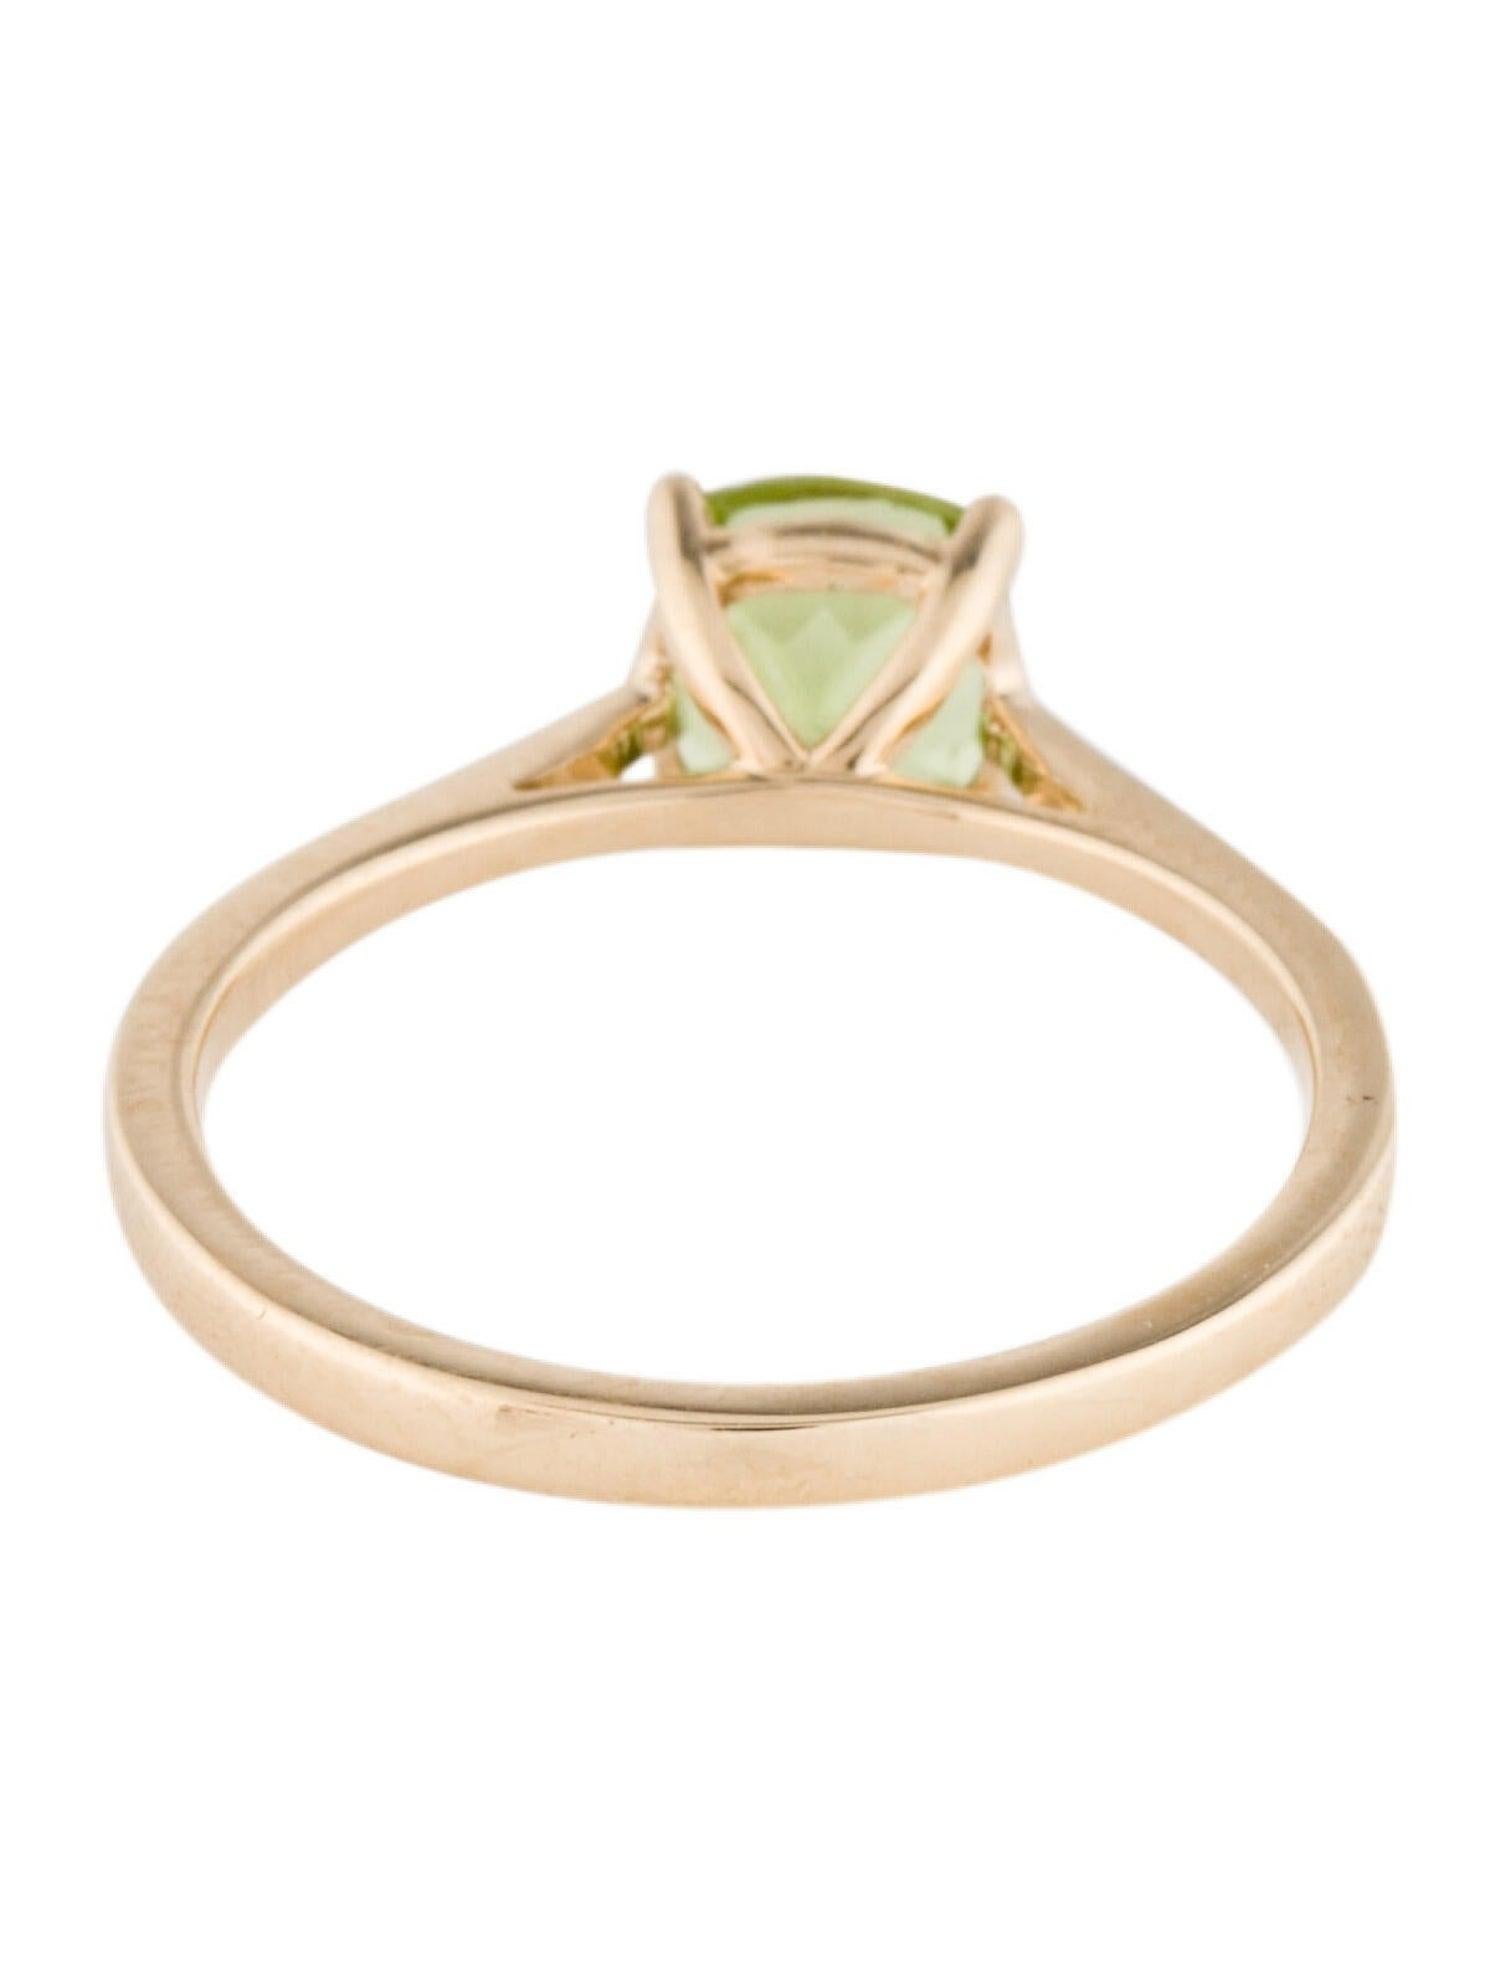 Brilliant Cut Exquisite 14K Peridot Solitaire Cocktail Ring - Size 6.75 - Elegant & Timeless For Sale